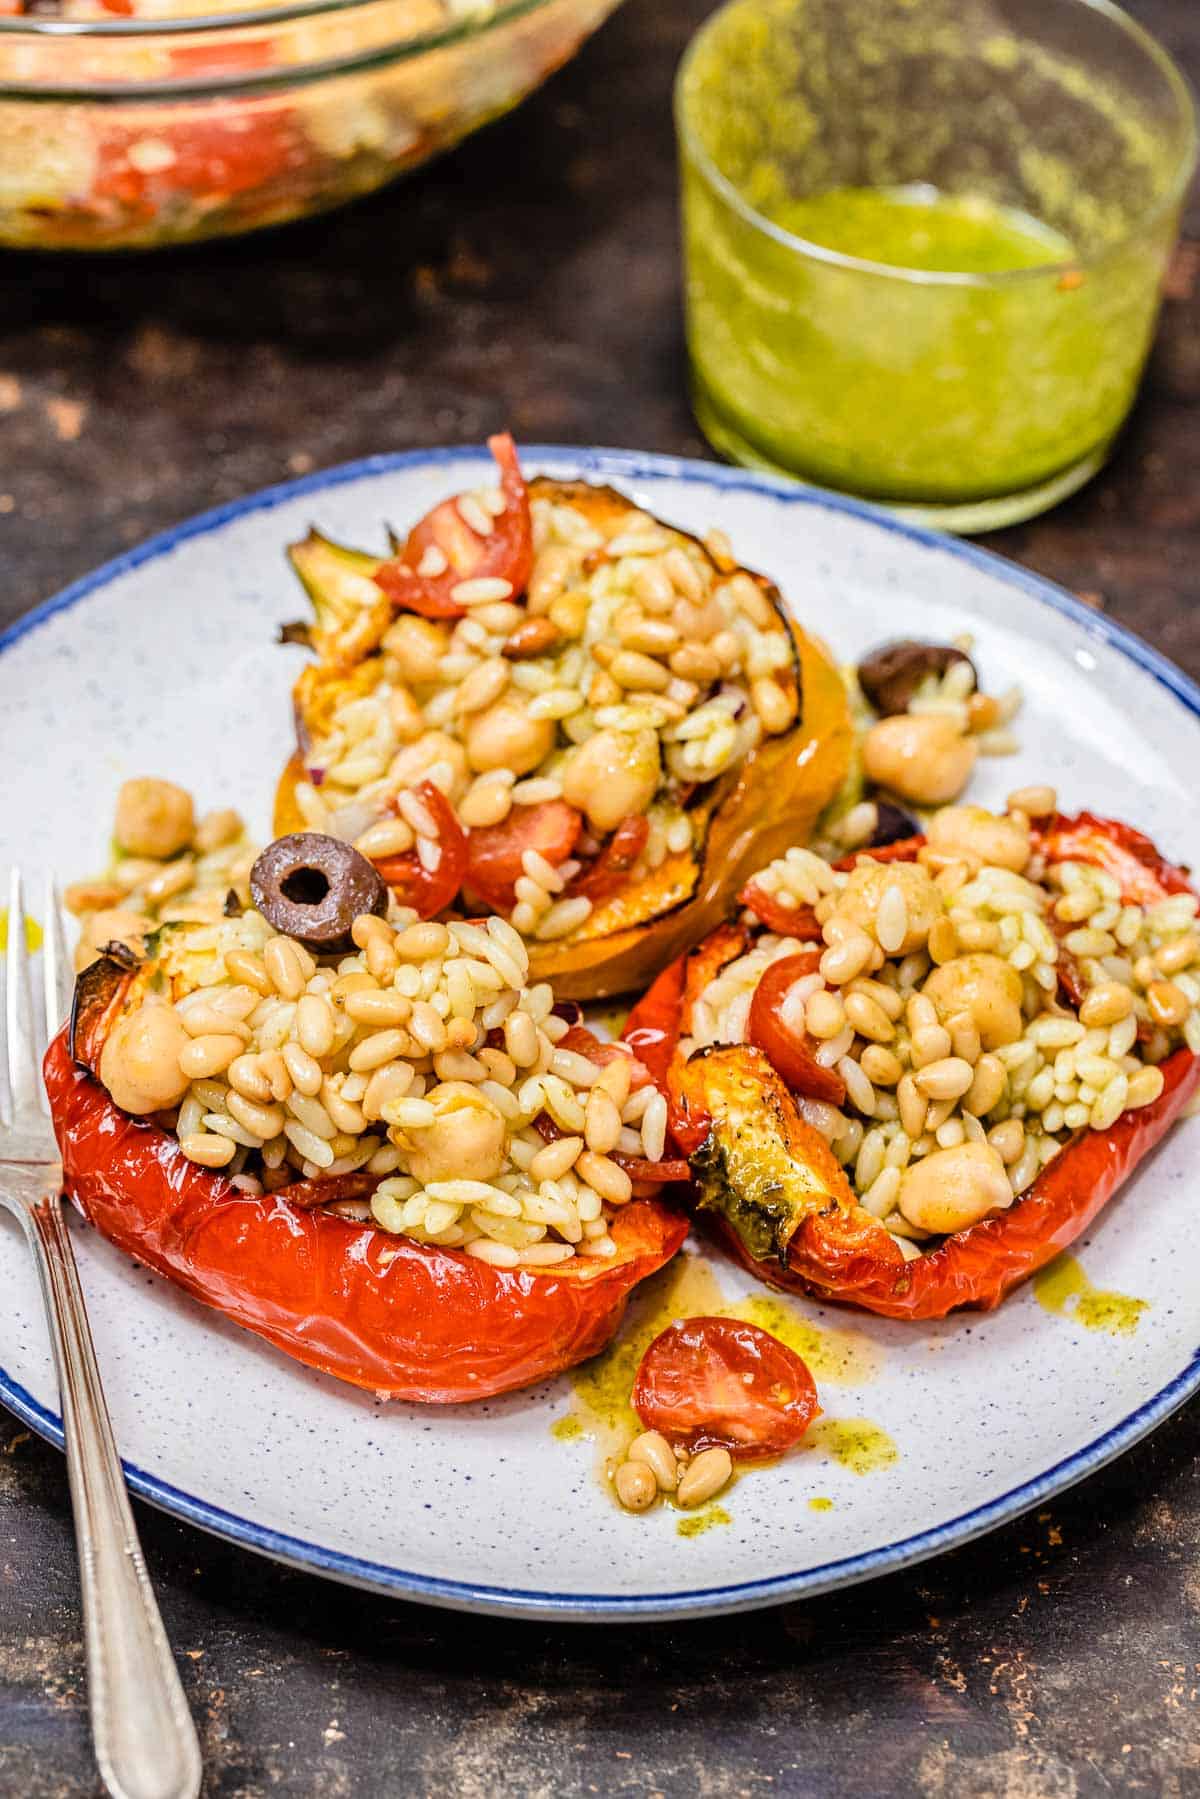 vegetarian stuffed peppers on a blue and white plate with a fork. A glass container of basil vinaigrette is in the background.